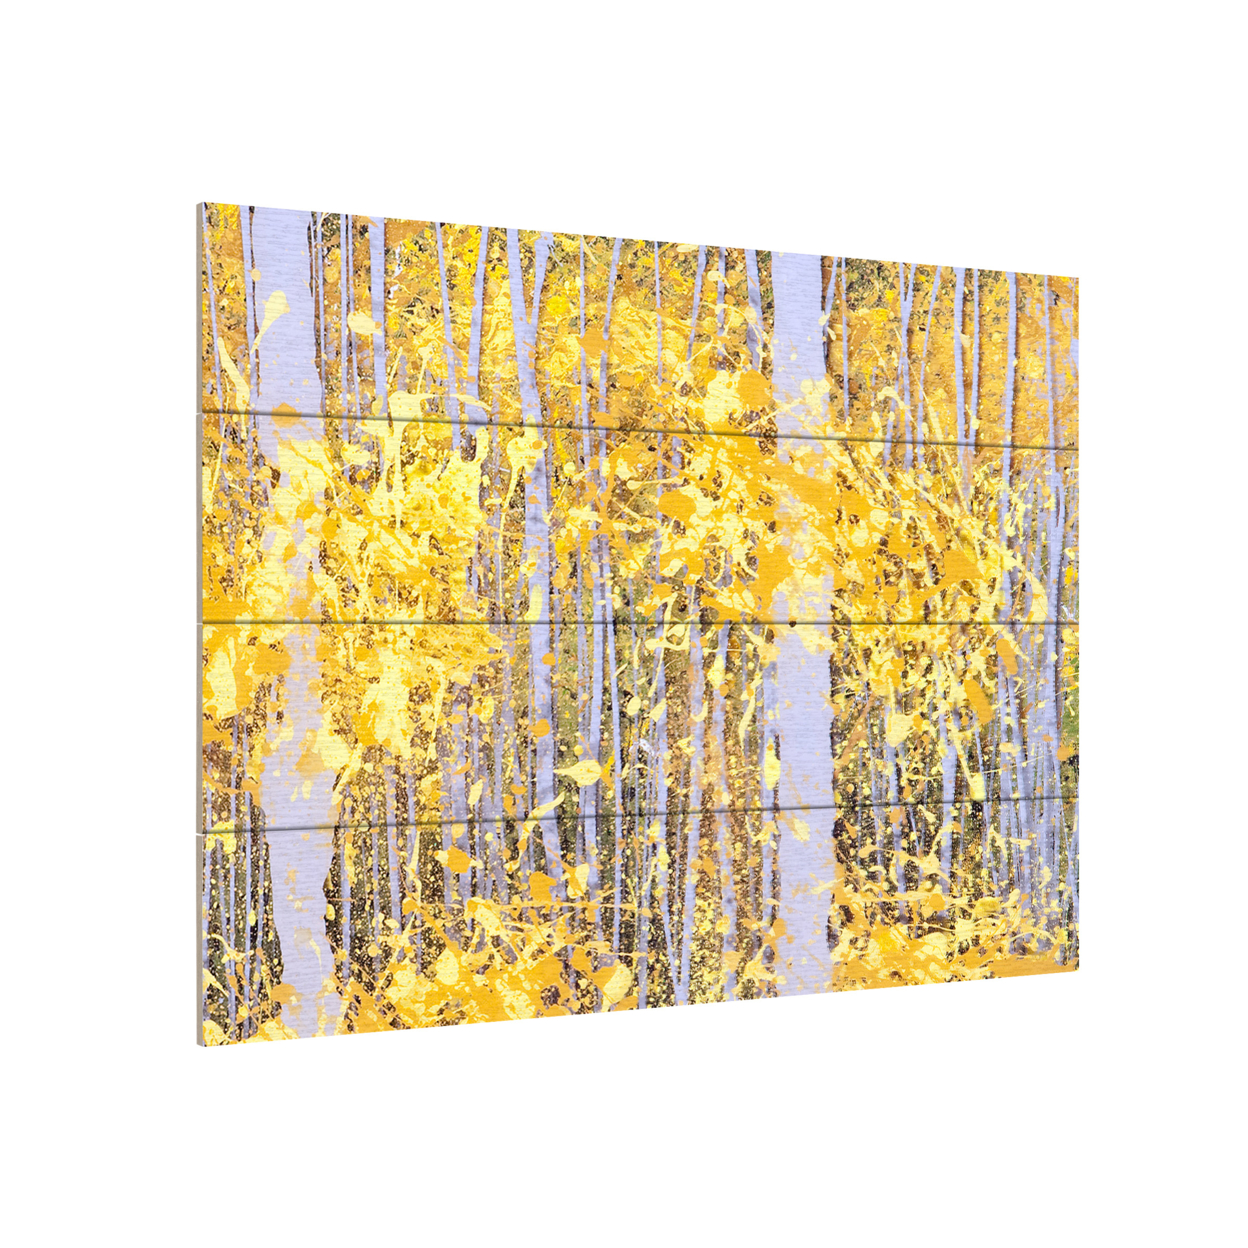 Wall Art 12 X 16 Inches Titled PanorAspens Grey Forest Ready To Hang Printed On Wooden Planks